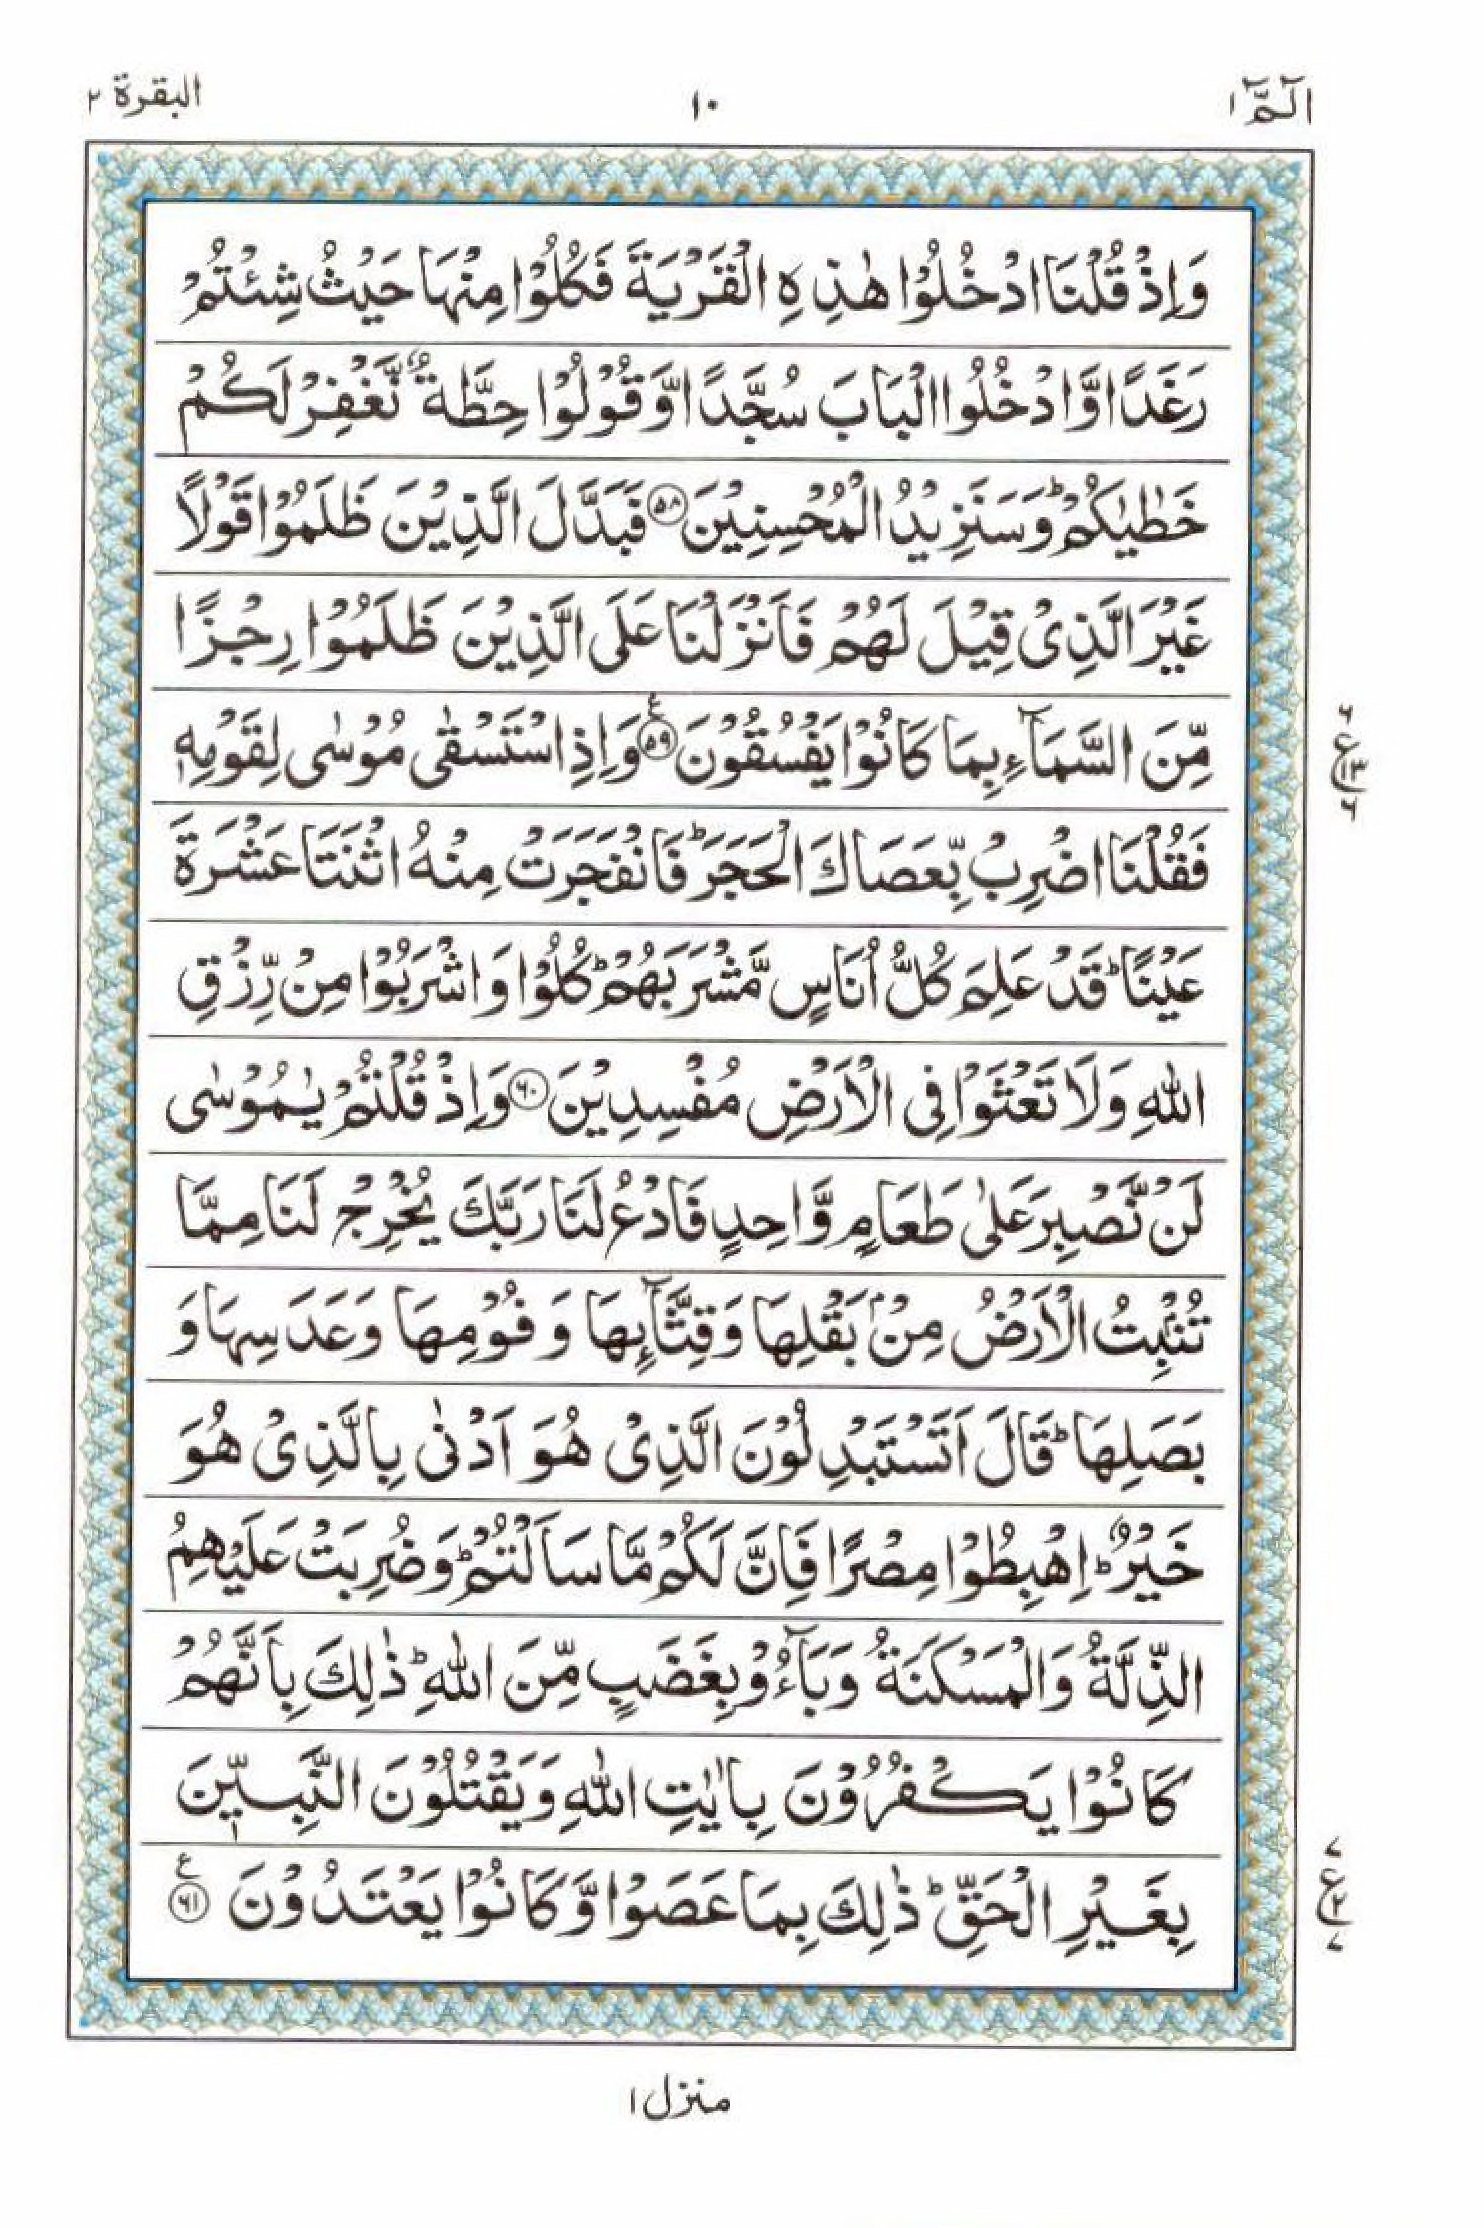 Read 15 Lines Quran, Part / Chapter / Siparah 1 Page 10